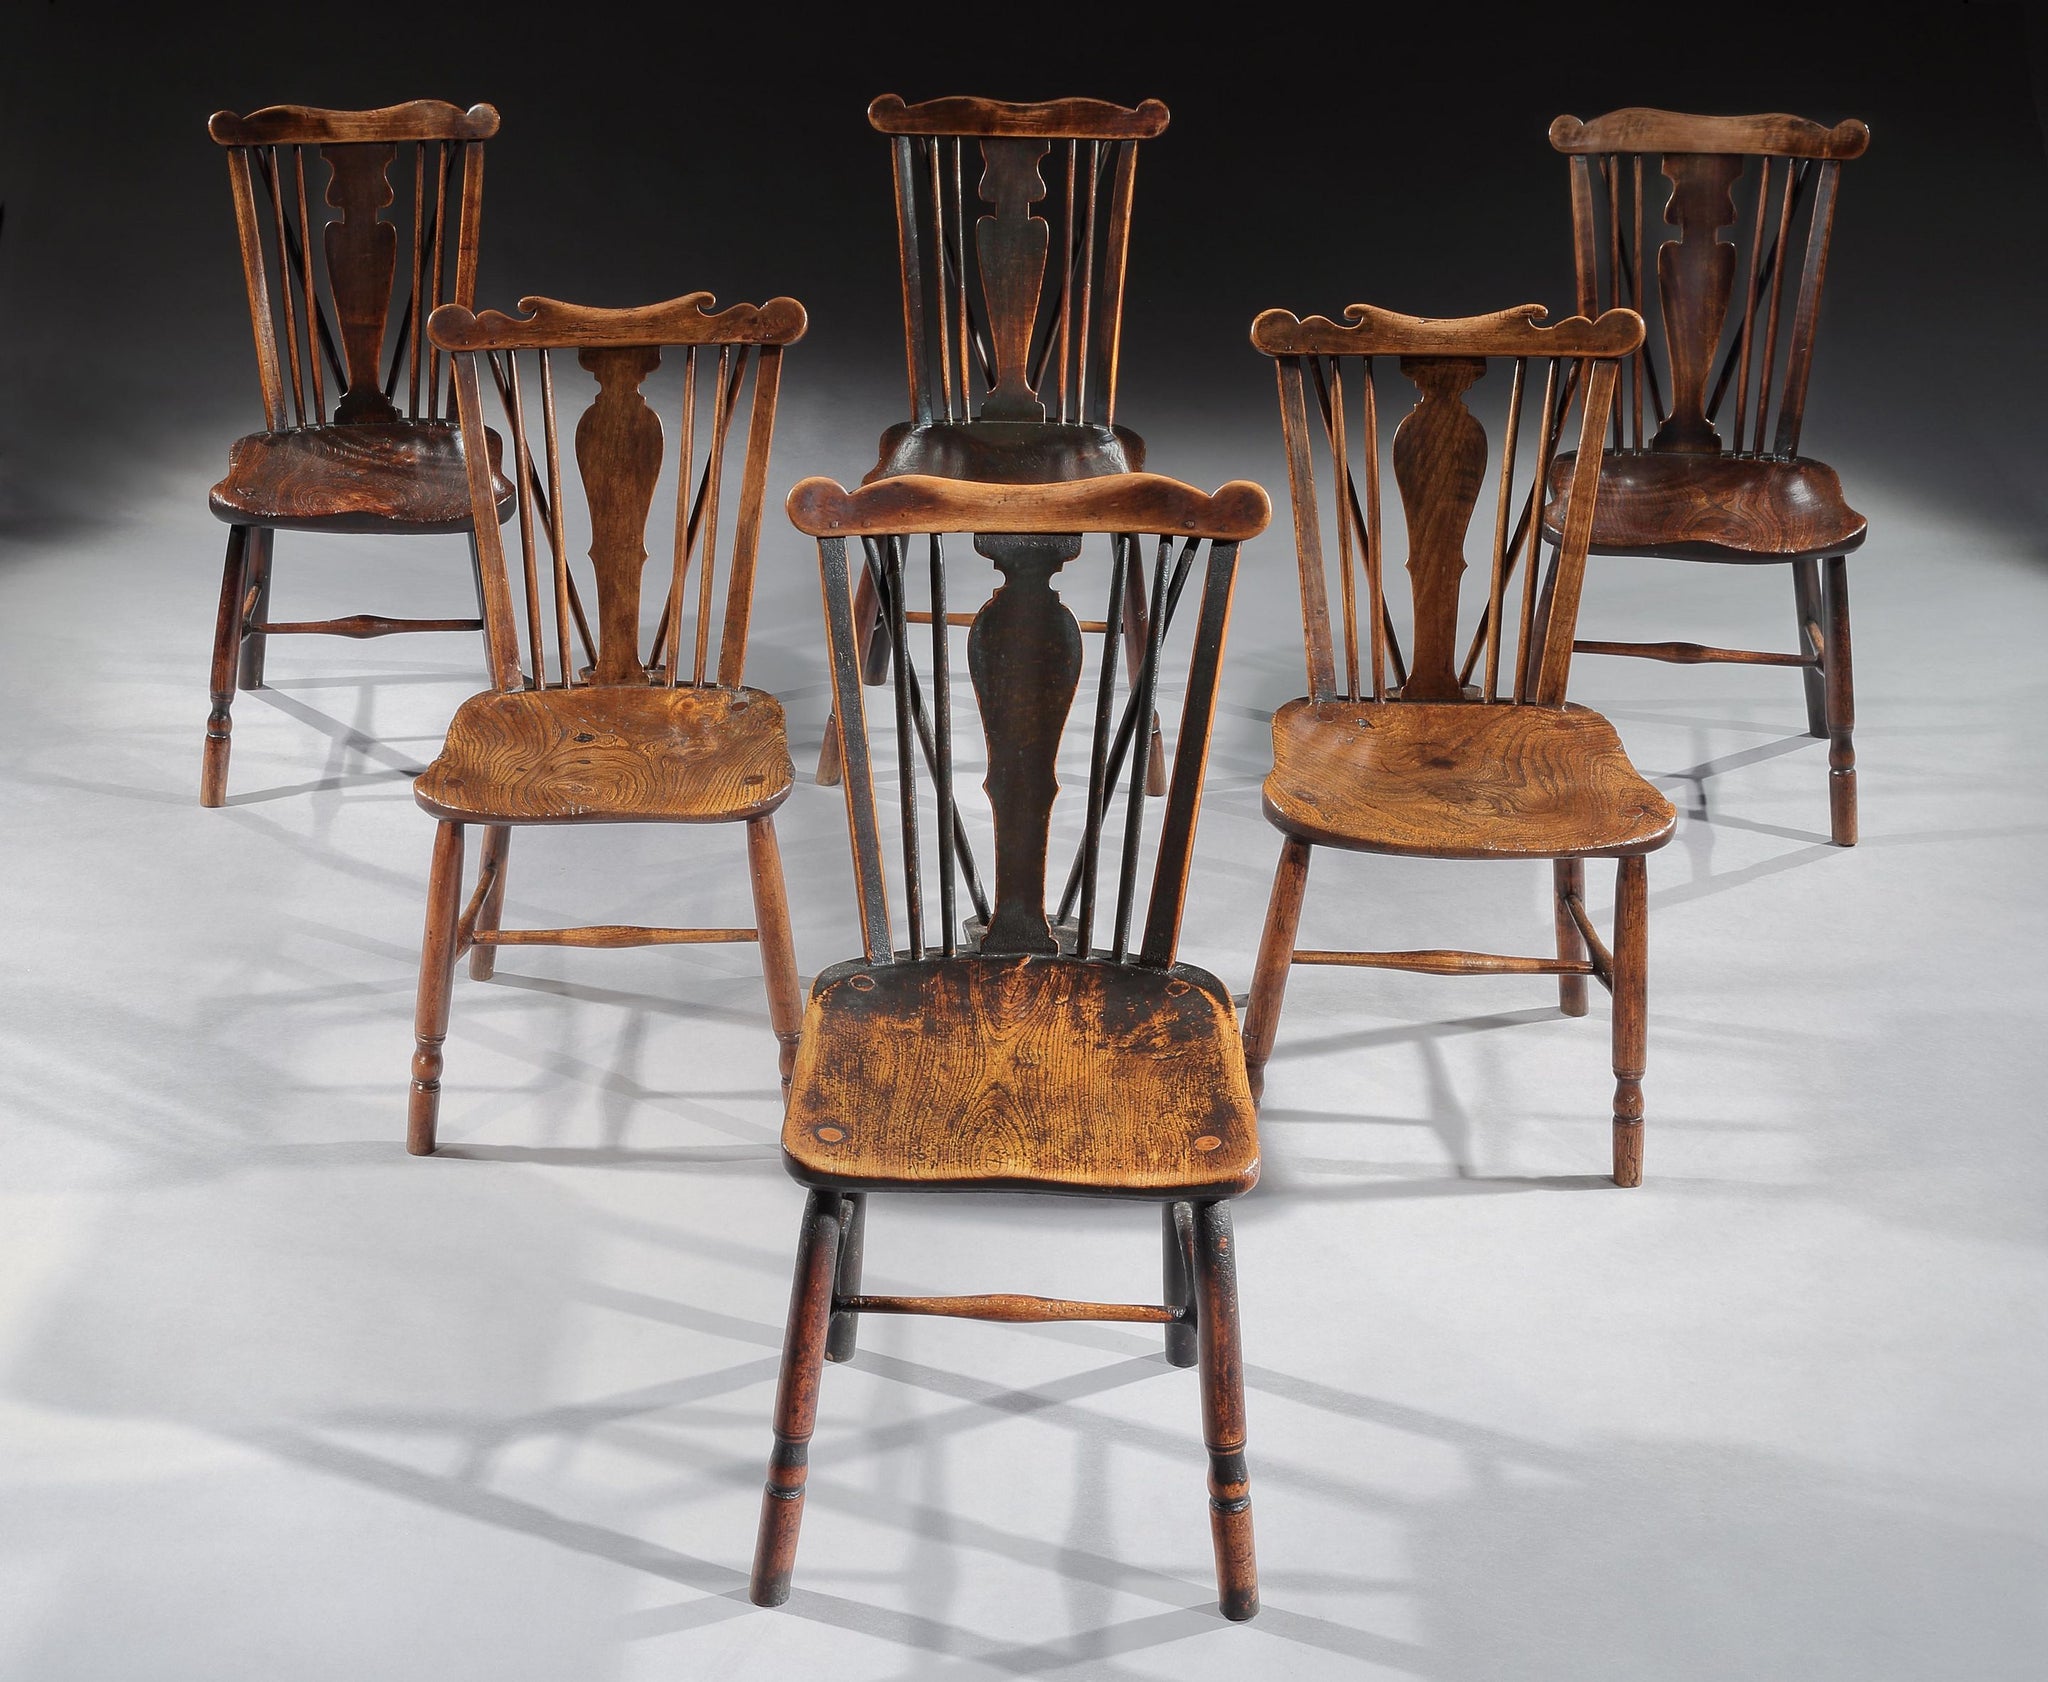 A Good Matched Set of Six Early Comb Back Windsor Chairs